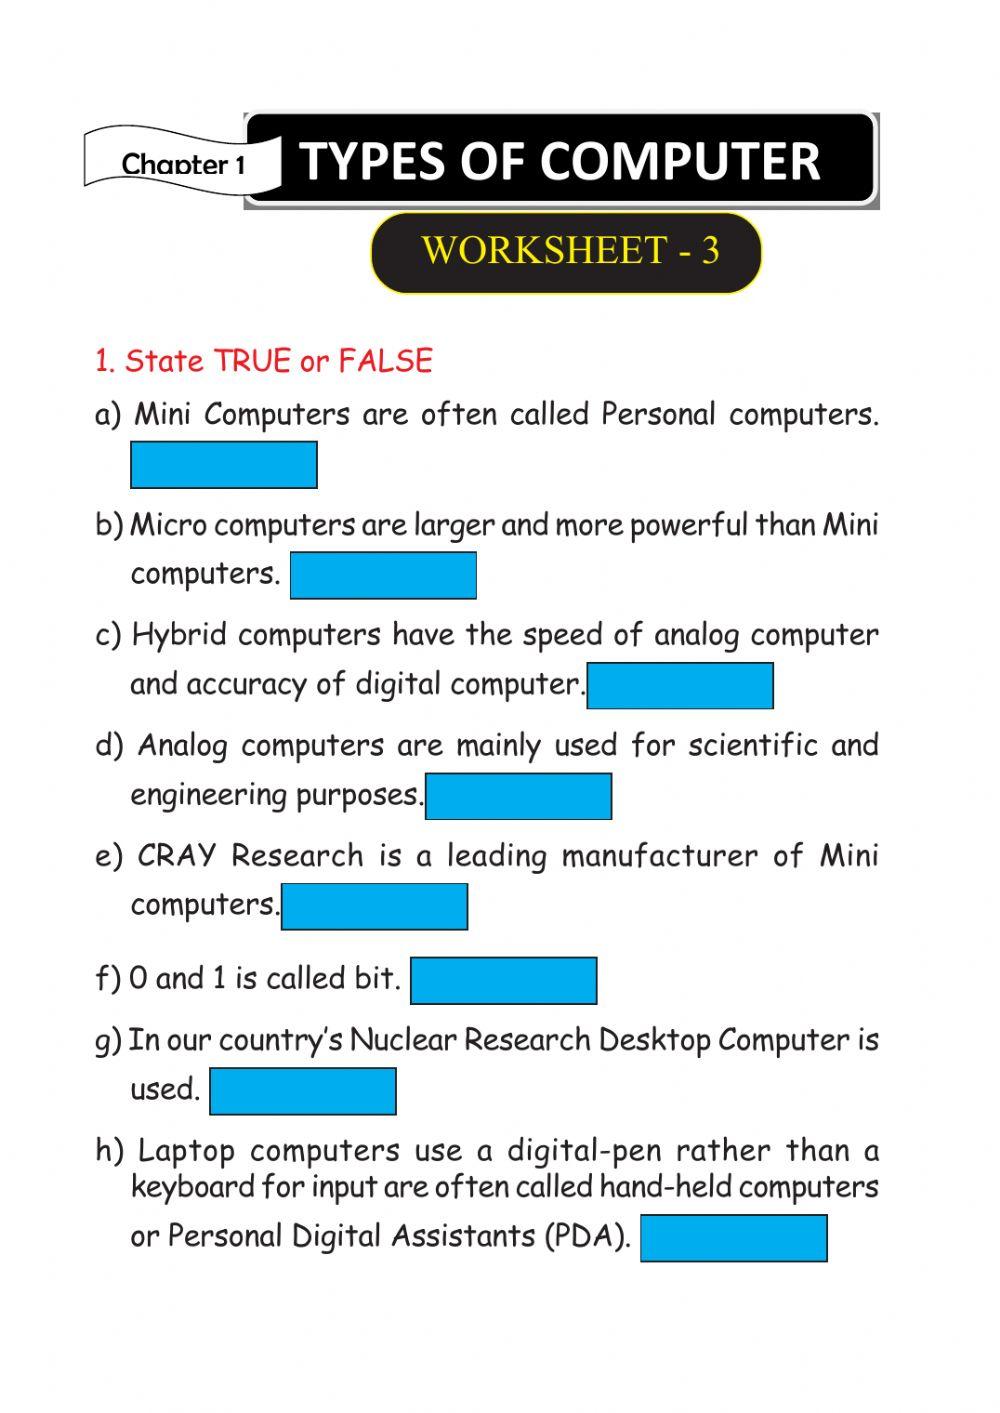 Types of Computer- 4